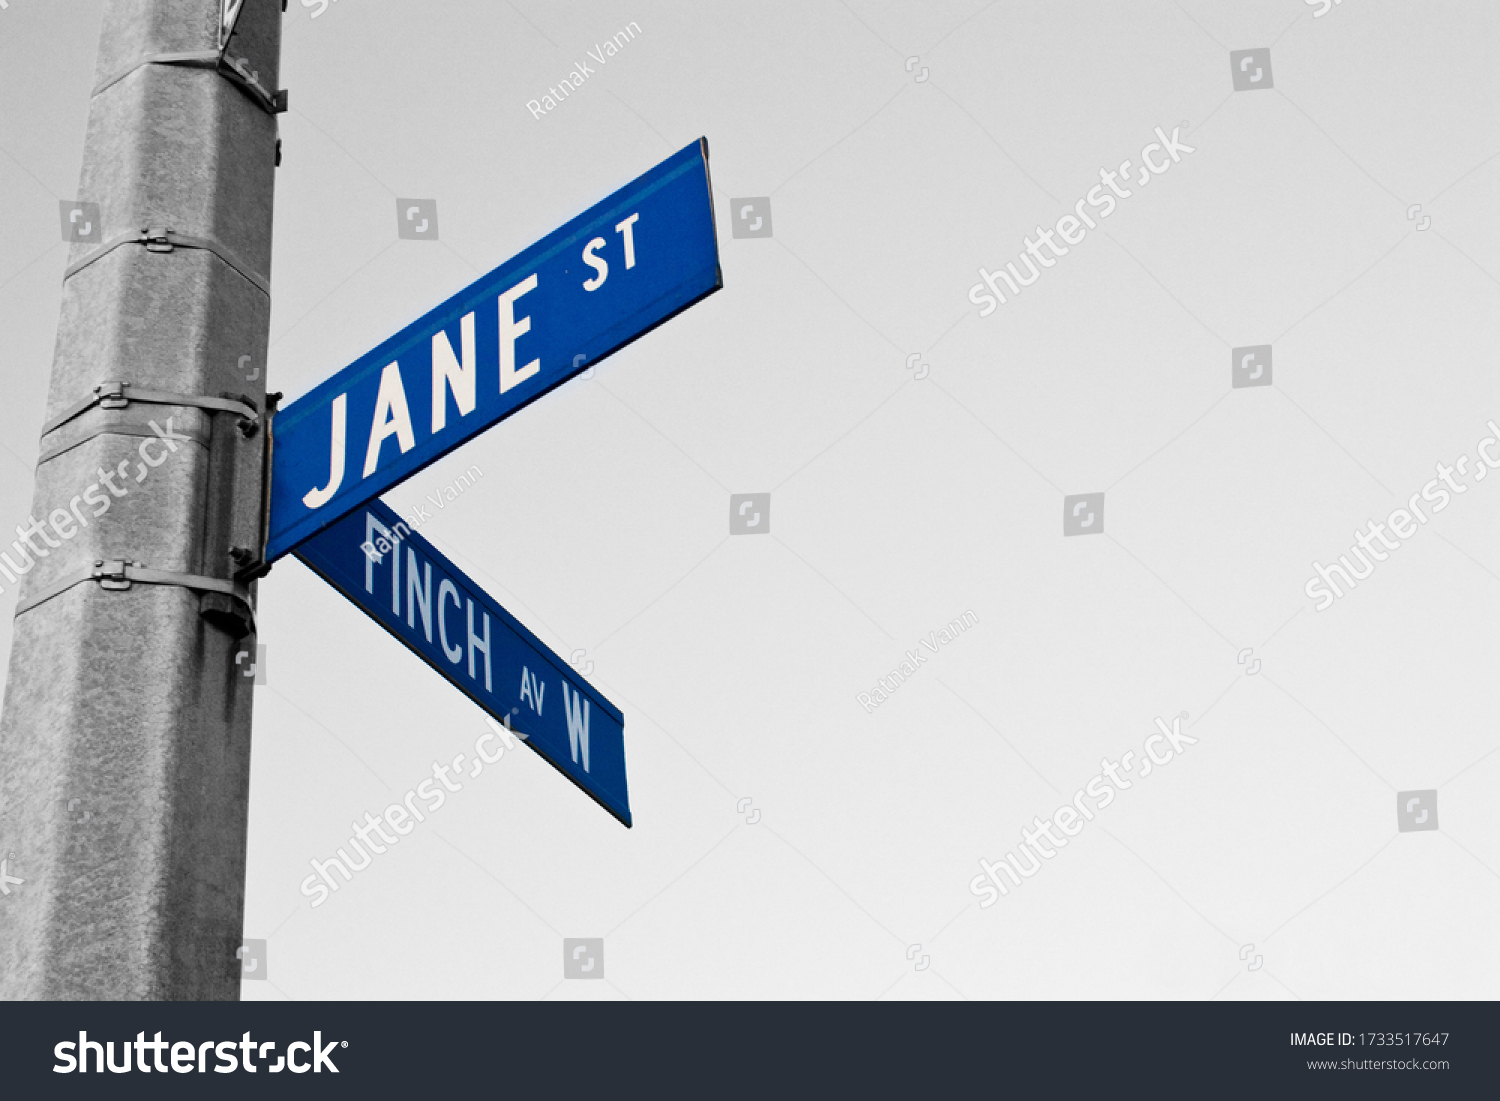 Jane Street and Finch Avenue W street sign at the corner of the intersection. #1733517647